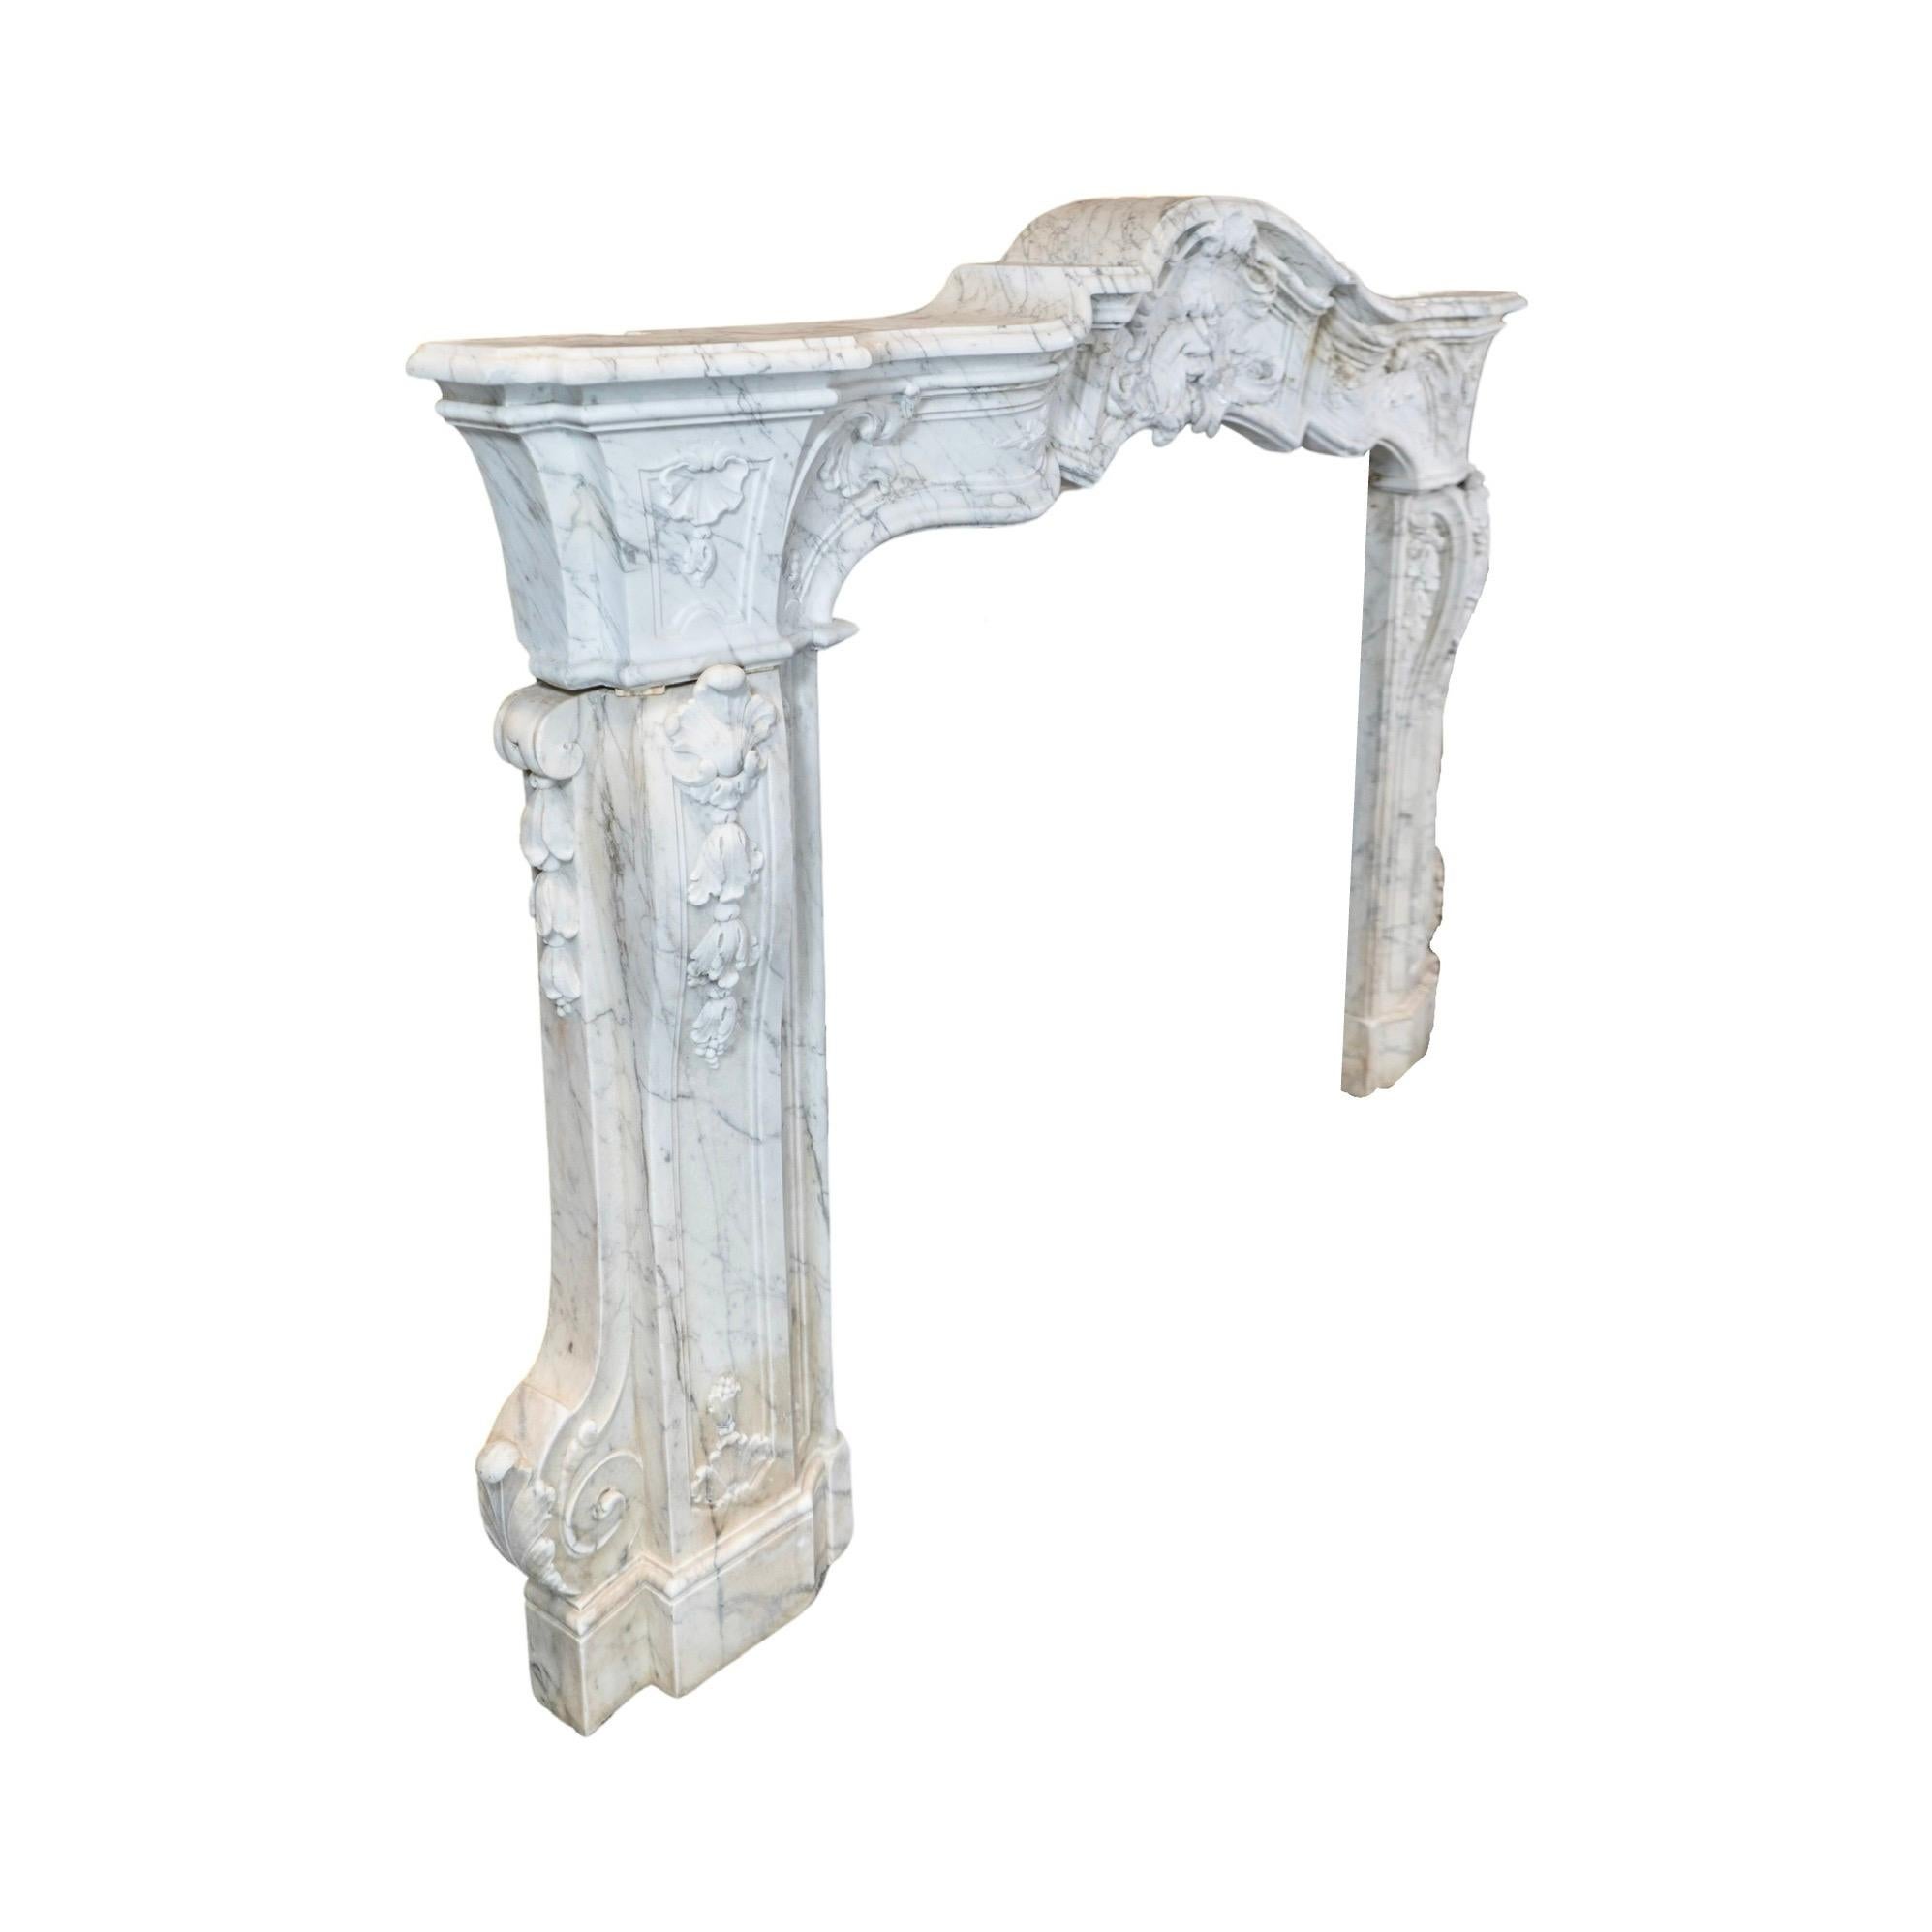 This Renaissance marble mantel origins from Italy, circa 1650.

Measurements firebox: H 41